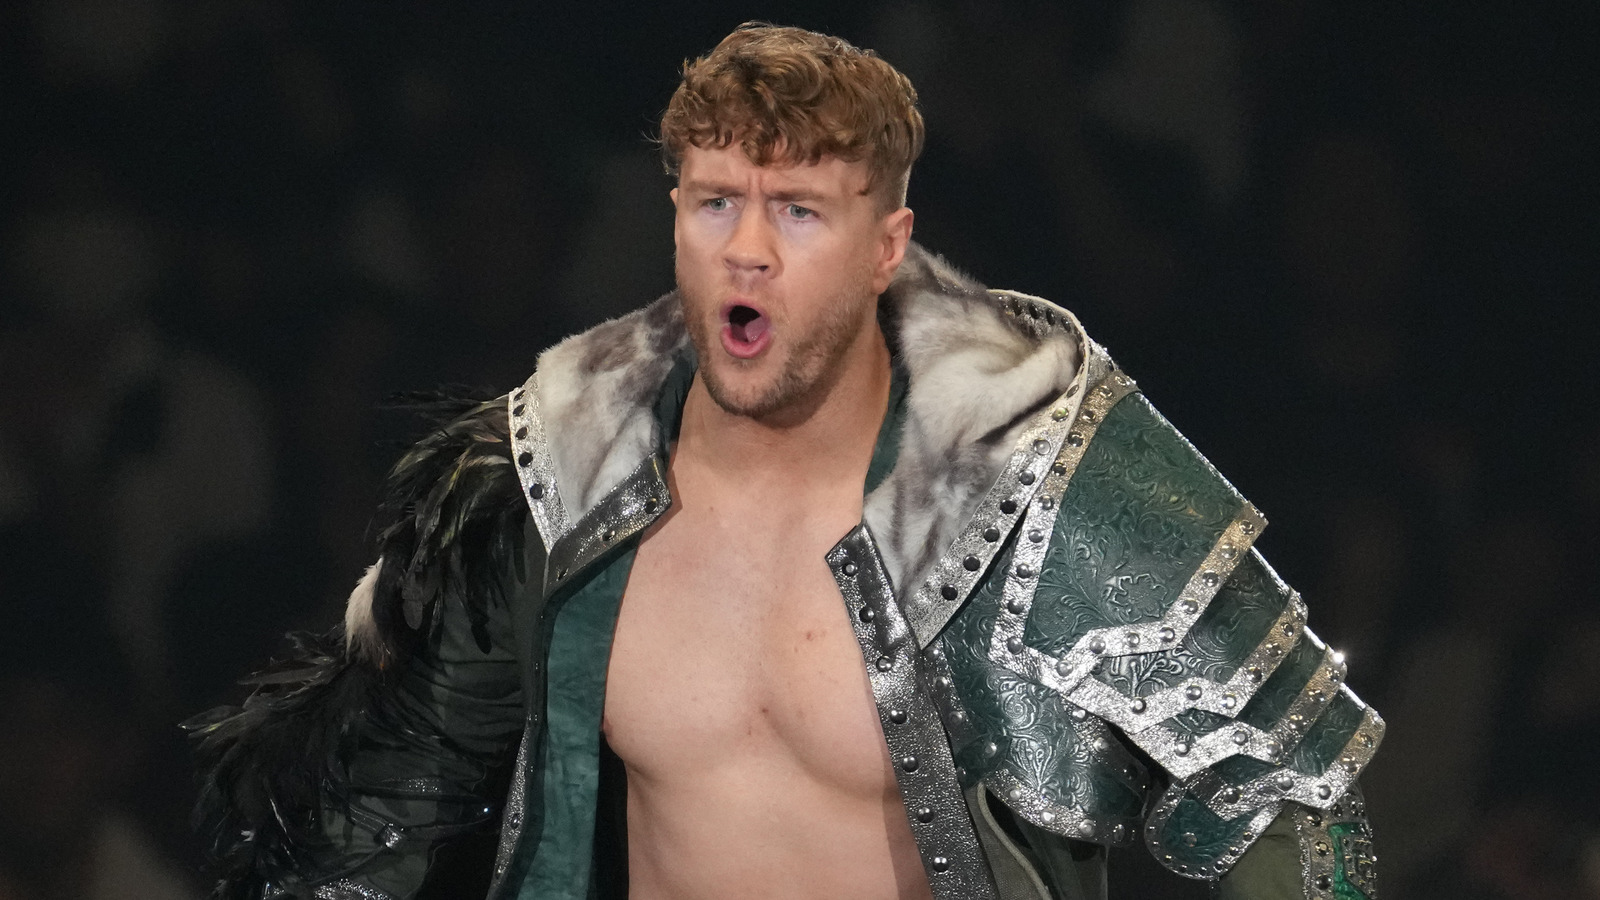 Will Ospreay Talks Motivation For Forbidden Door 2023 Rematch With